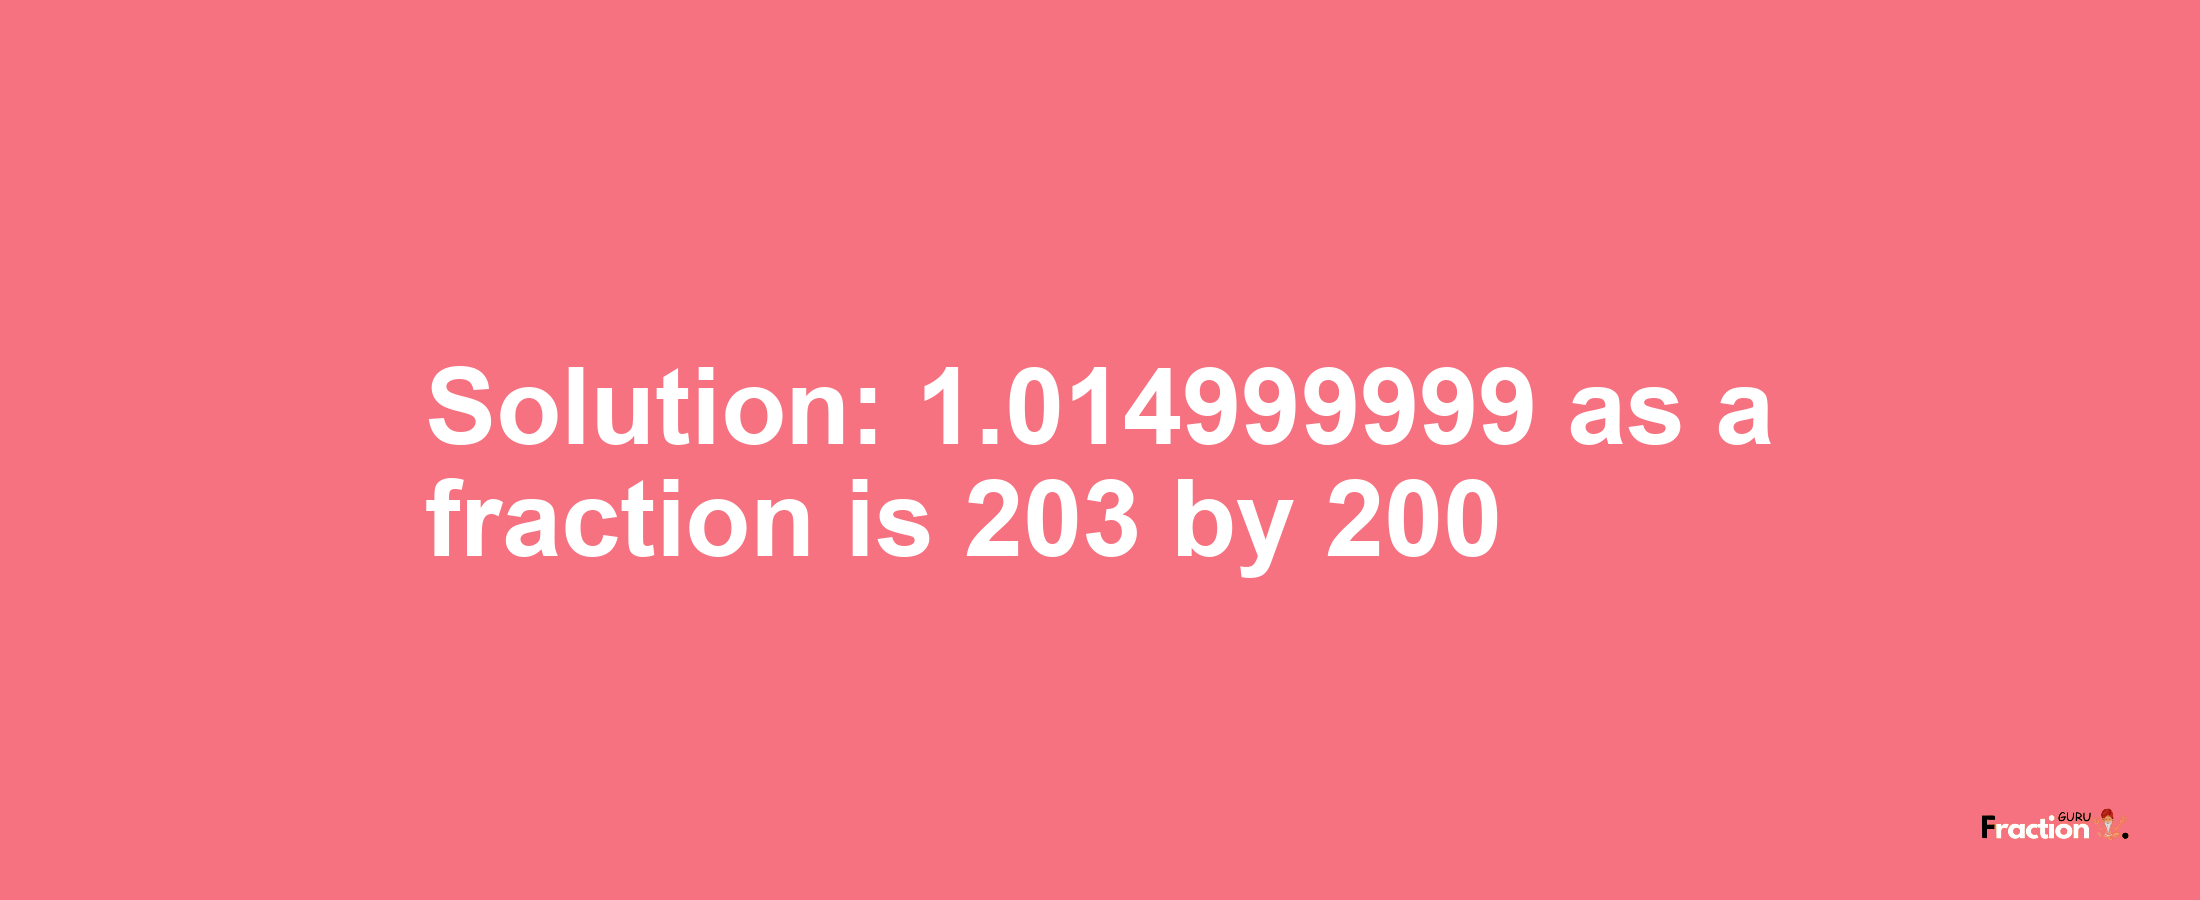 Solution:1.014999999 as a fraction is 203/200